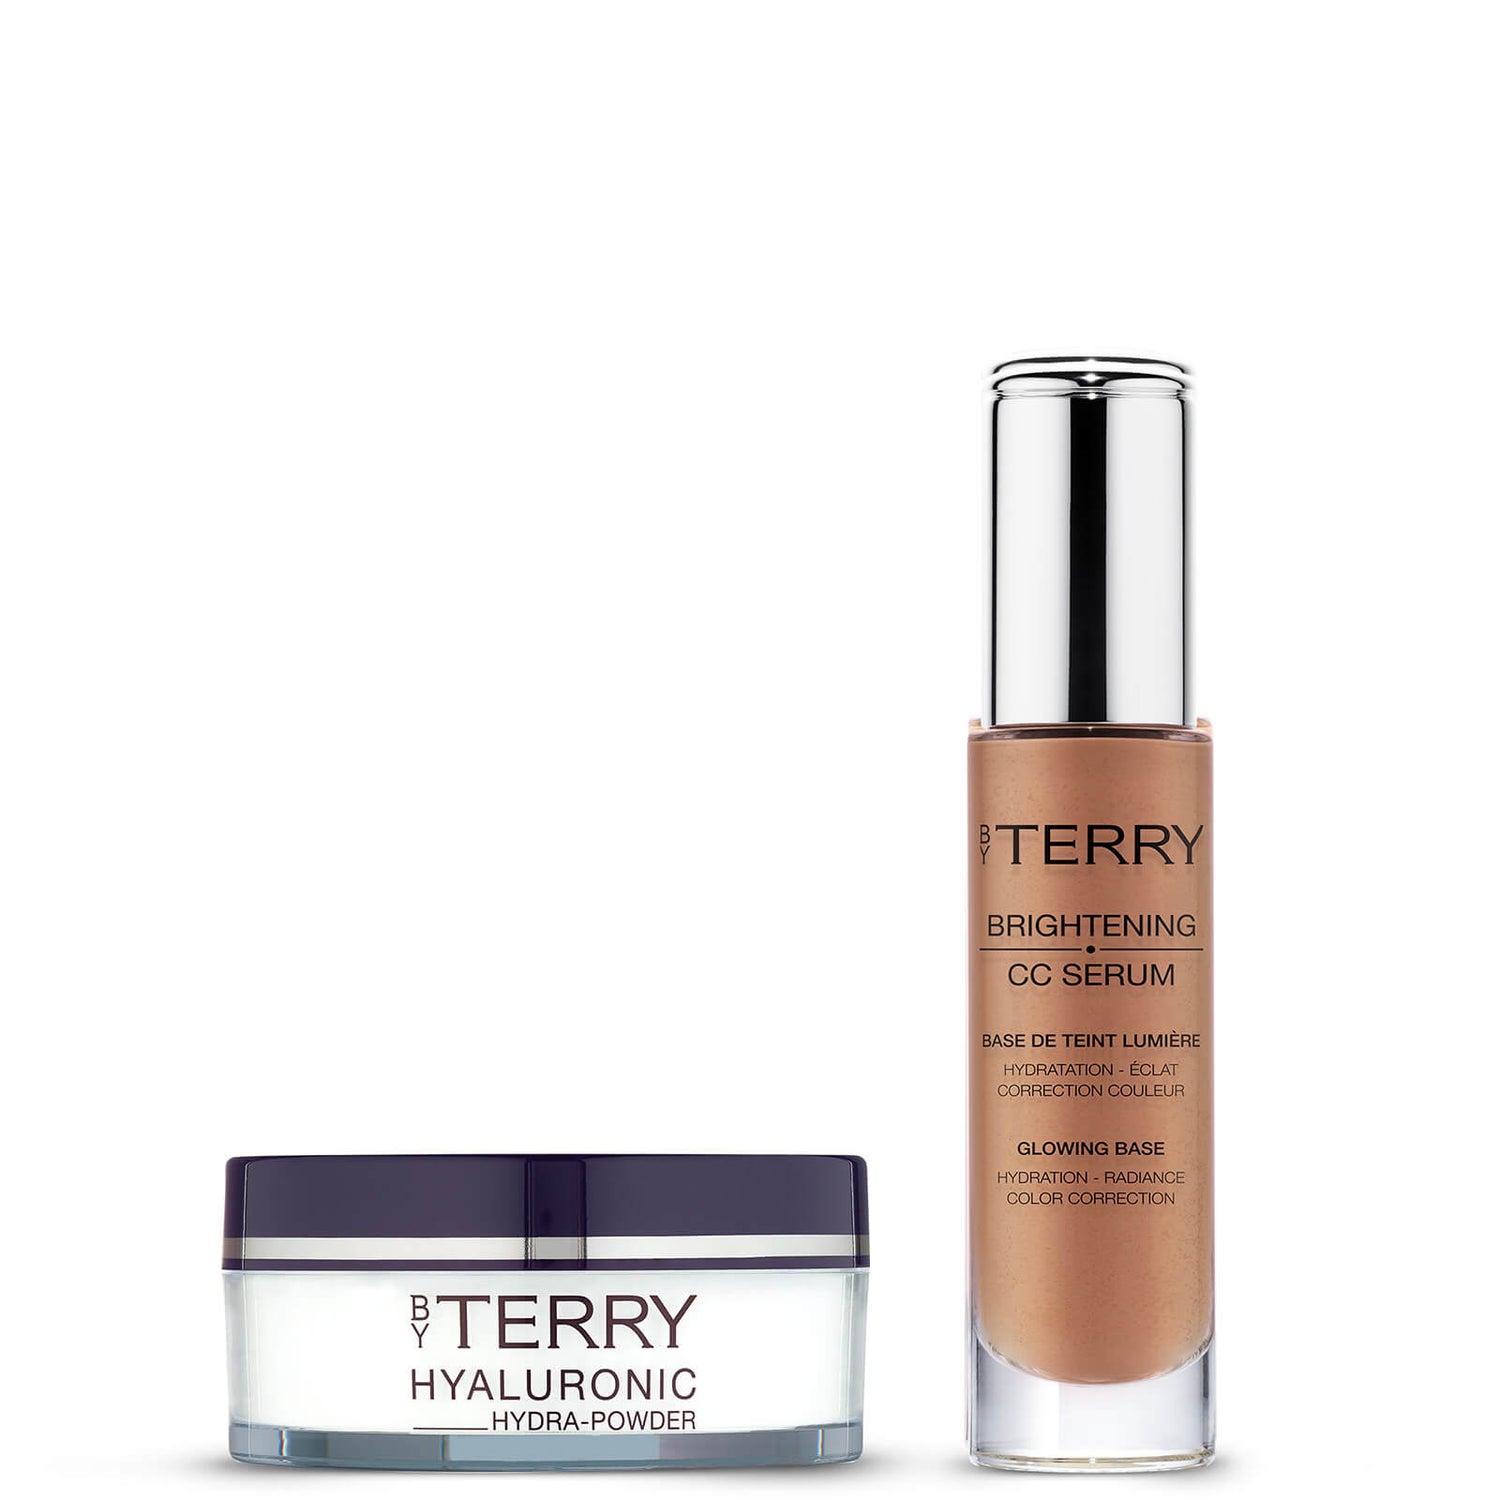 Siero CC Hyaluronic Hydra-Powder and Cellularose- No.4 Set Sunny Flash By Terry